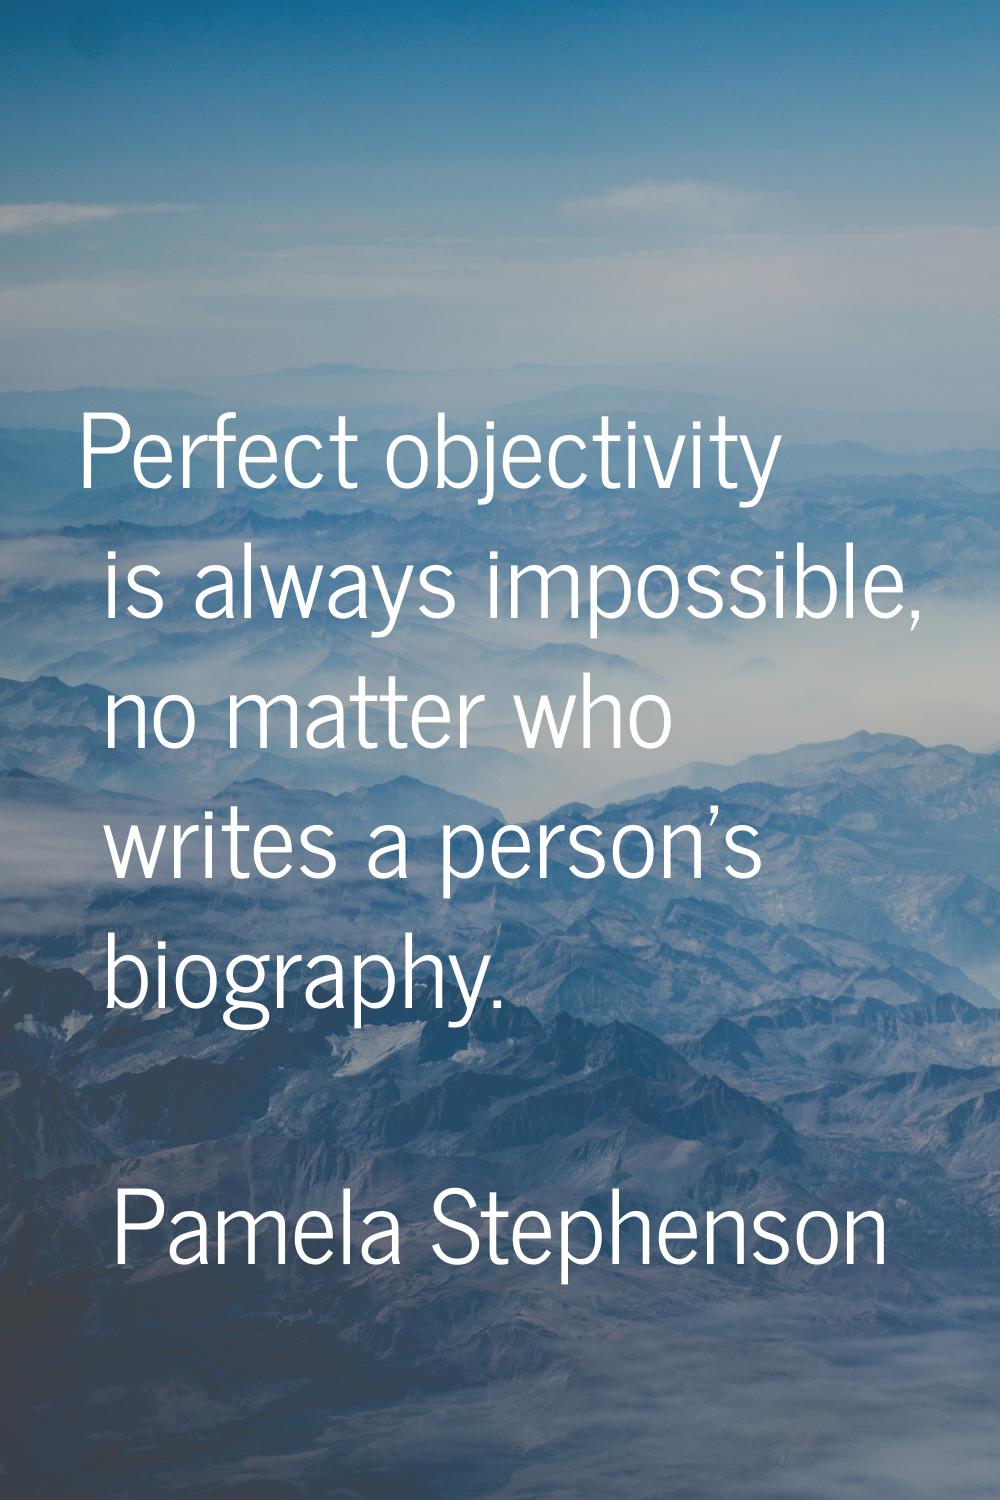 Perfect objectivity is always impossible, no matter who writes a person's biography.